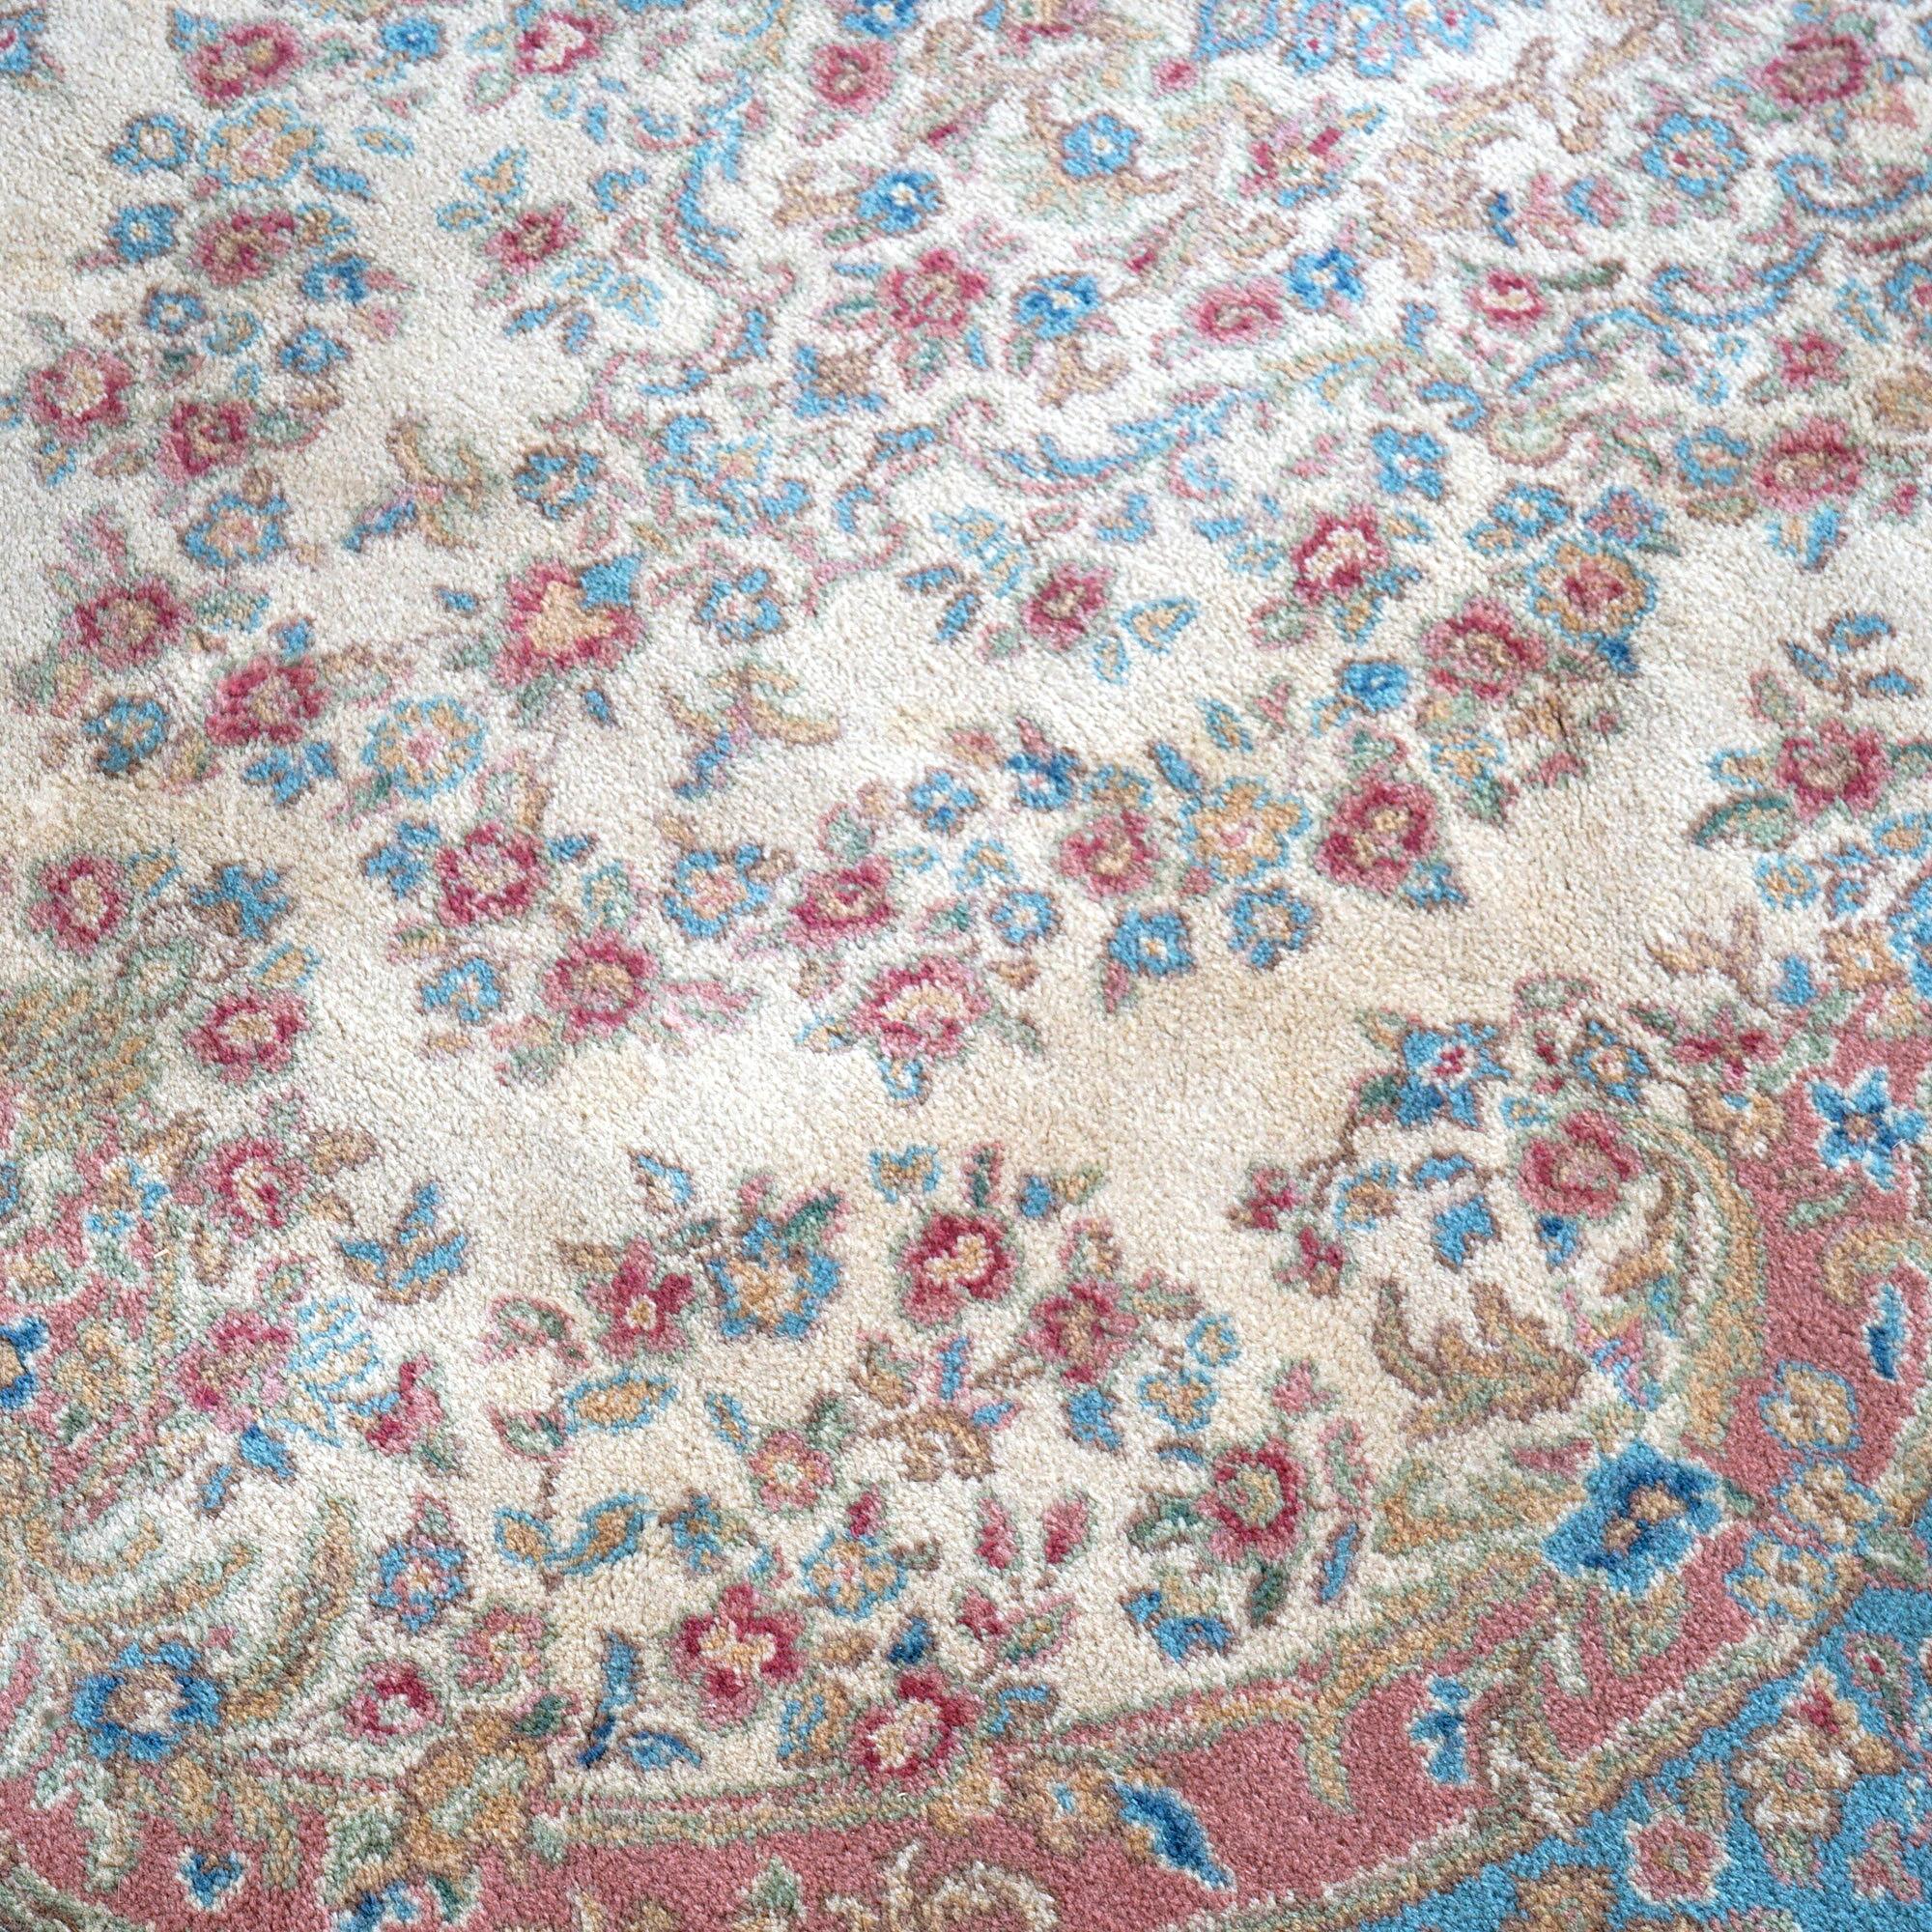 An oriental Kirman style rug by Karastan offers wool construction with central medallion on blue ground, label as photographed, c1950

Measures- 112''L x 69''W x 1'' thick

Catalogue Note: Ask about DISCOUNTED DELIVERY RATES available to most